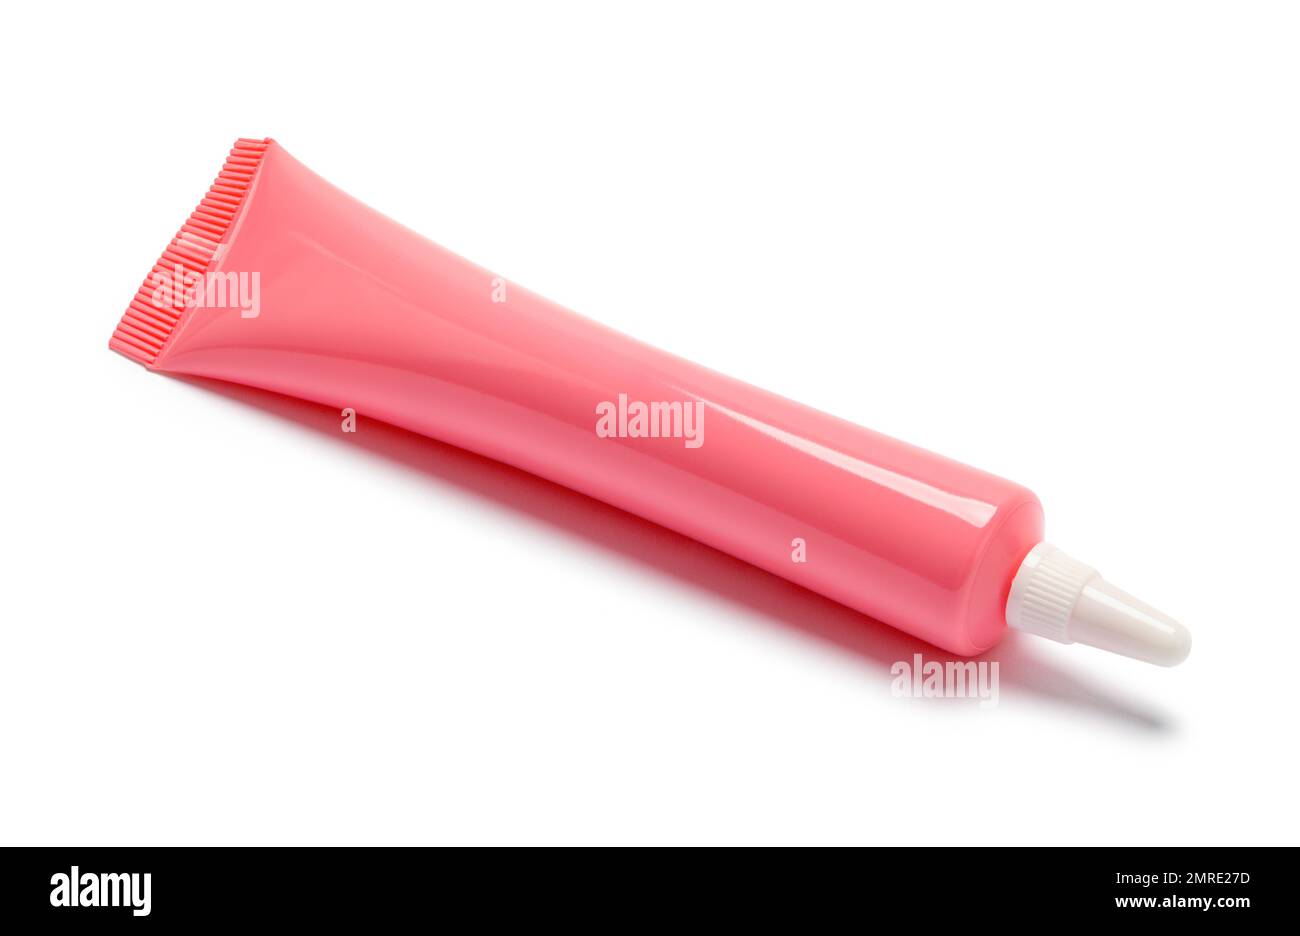 Pink Icing Gel Tube Cut Out on White. Stock Photo